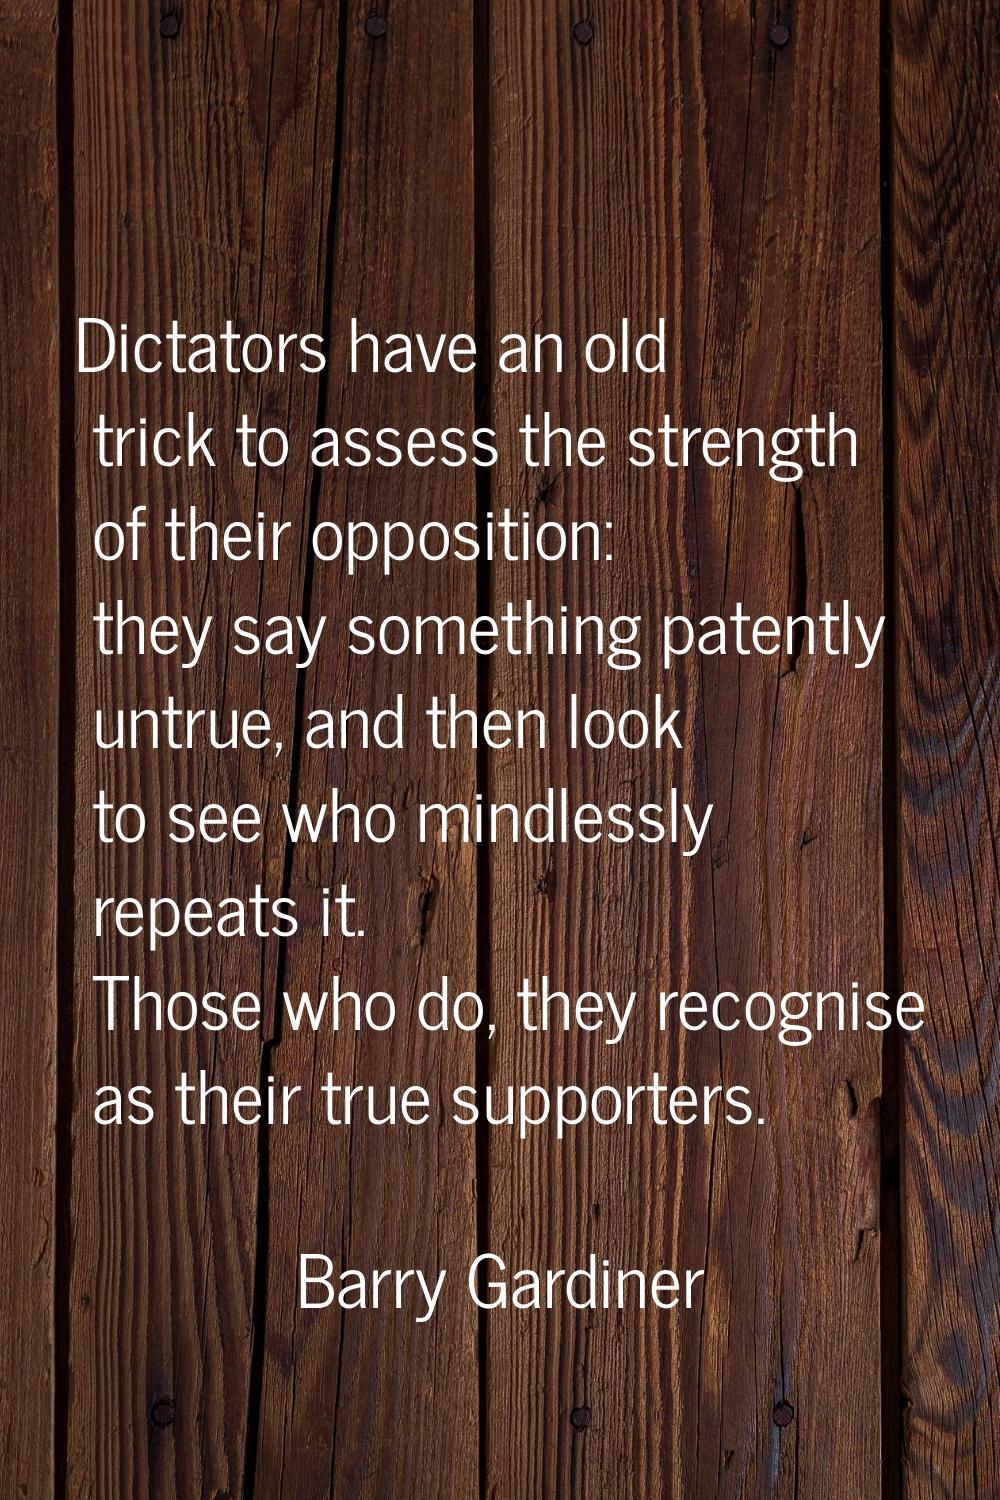 Dictators have an old trick to assess the strength of their opposition: they say something patently